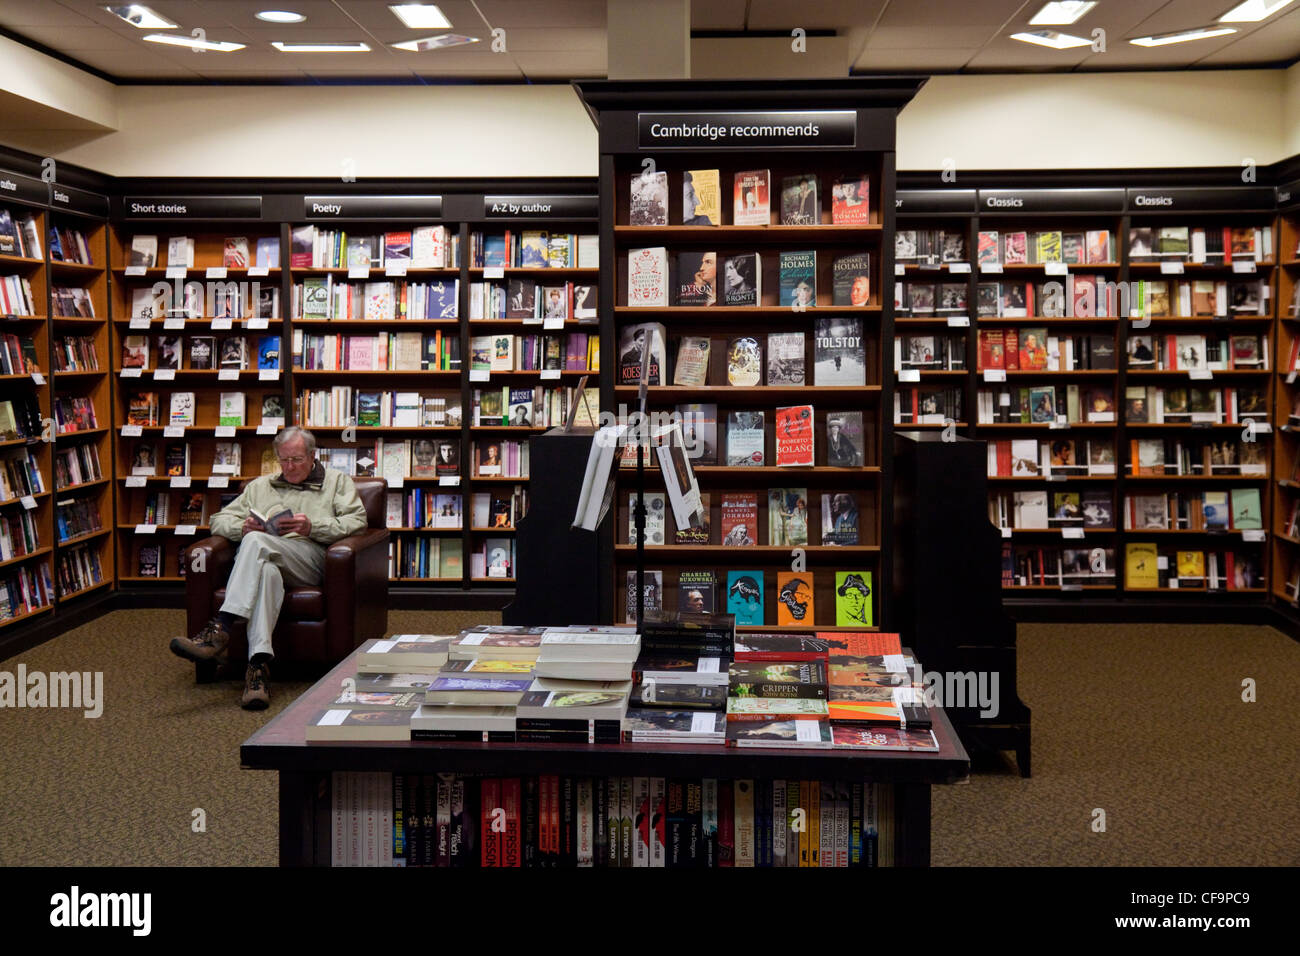 A man sitting reading in a Waterstones Bookshop, Cambridge UK Stock Photo